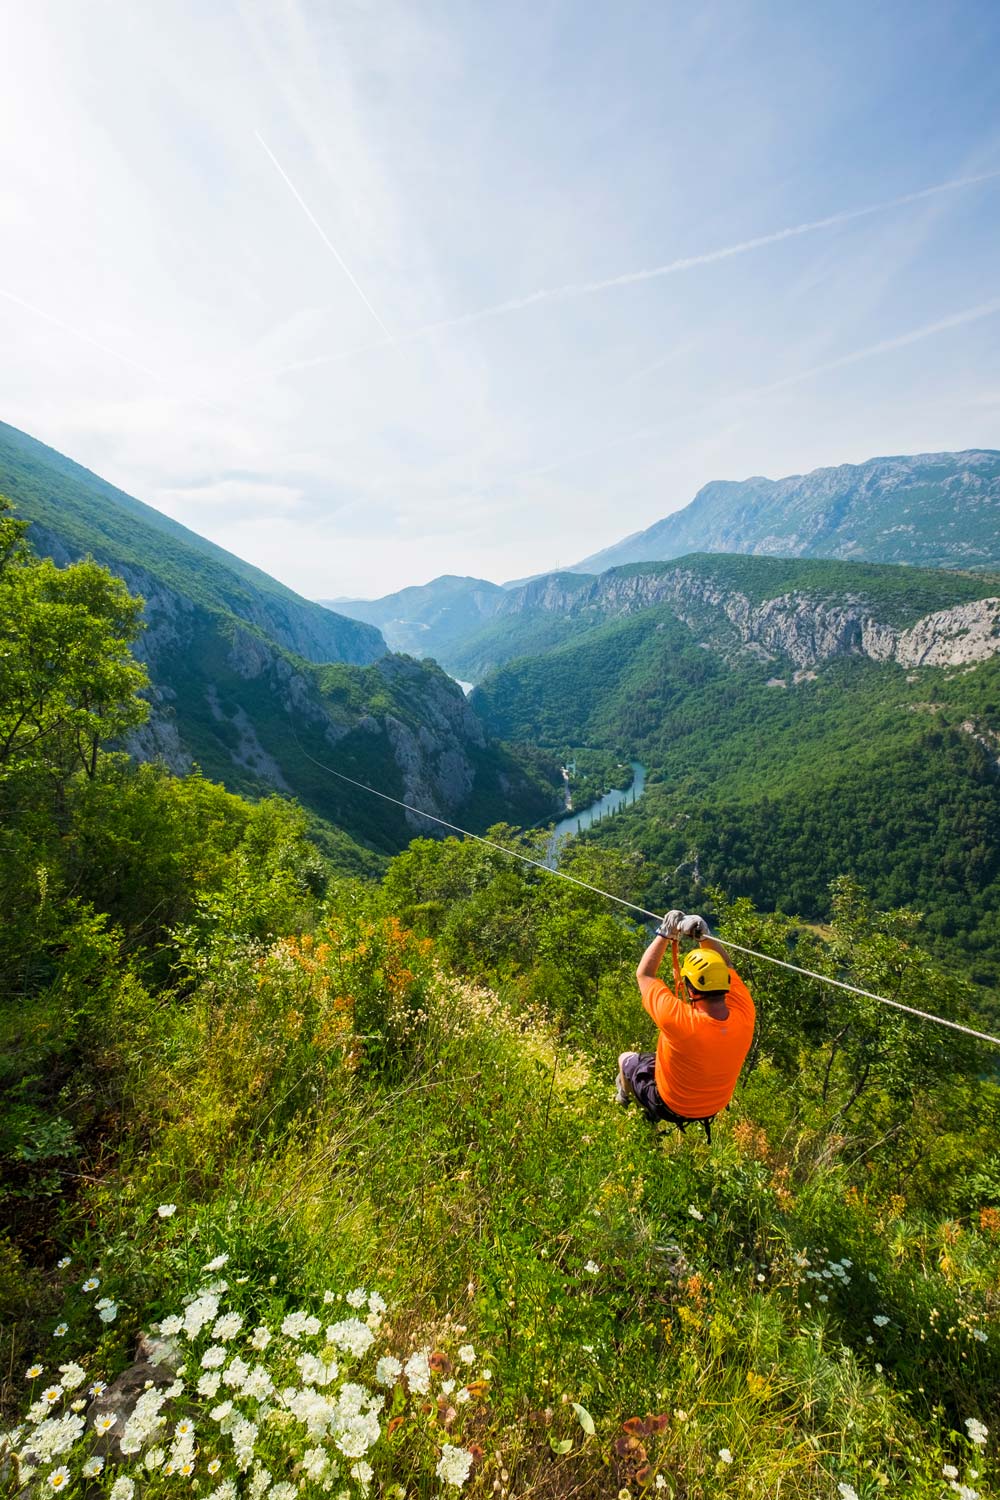 A person ziplinling across the Cetina gorge